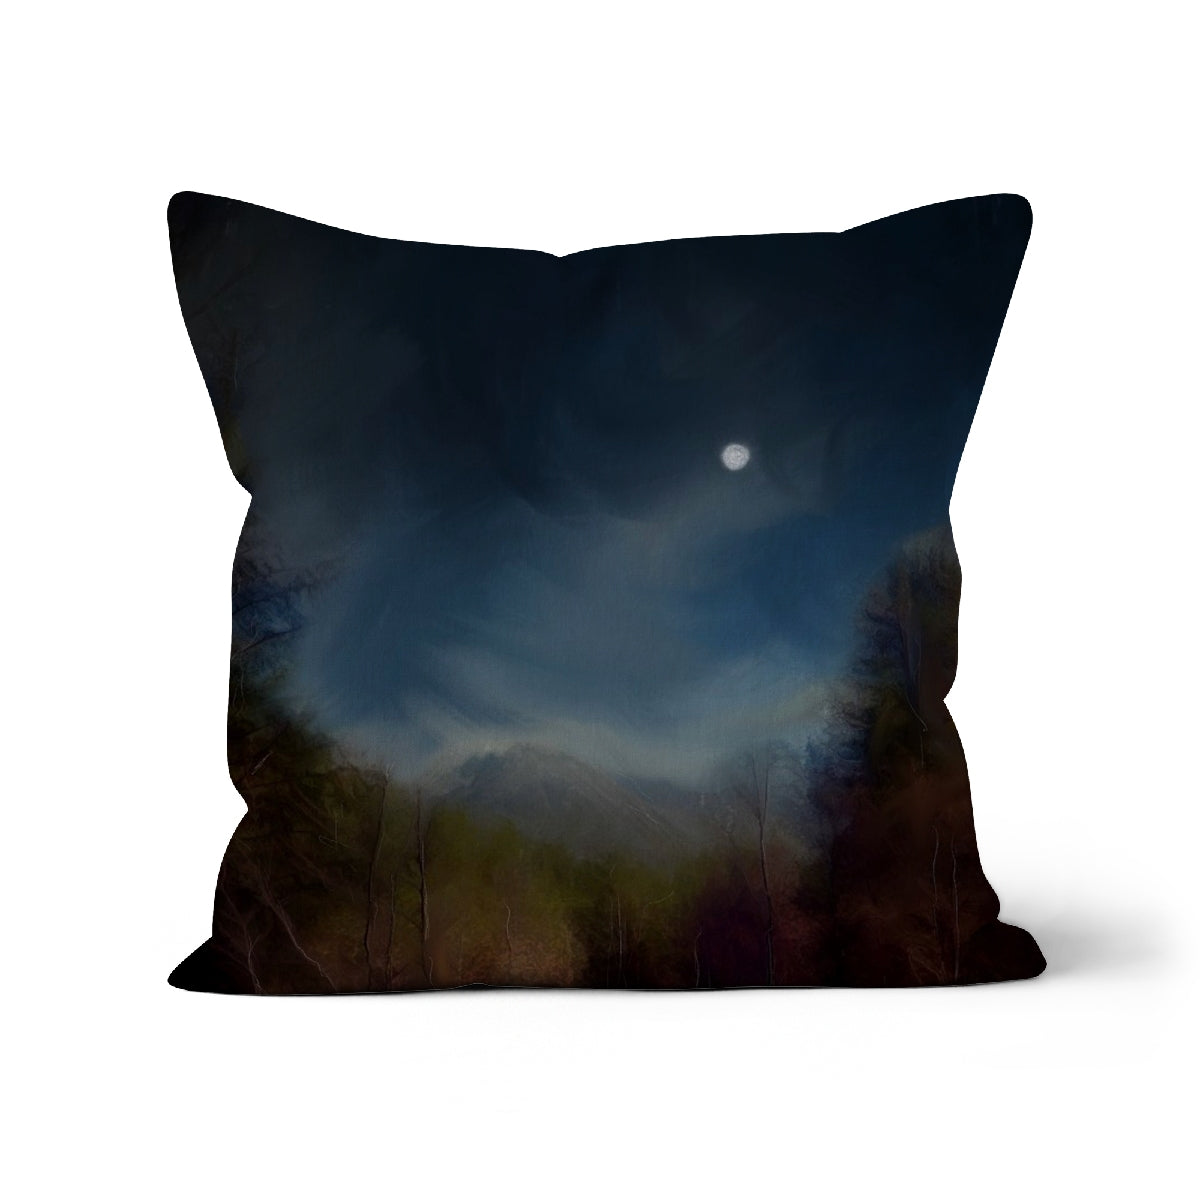 Glencoe Lochan Moonlight Art Gifts Cushion-Cushions-Scottish Lochs & Mountains Art Gallery-Faux Suede-24"x24"-Paintings, Prints, Homeware, Art Gifts From Scotland By Scottish Artist Kevin Hunter